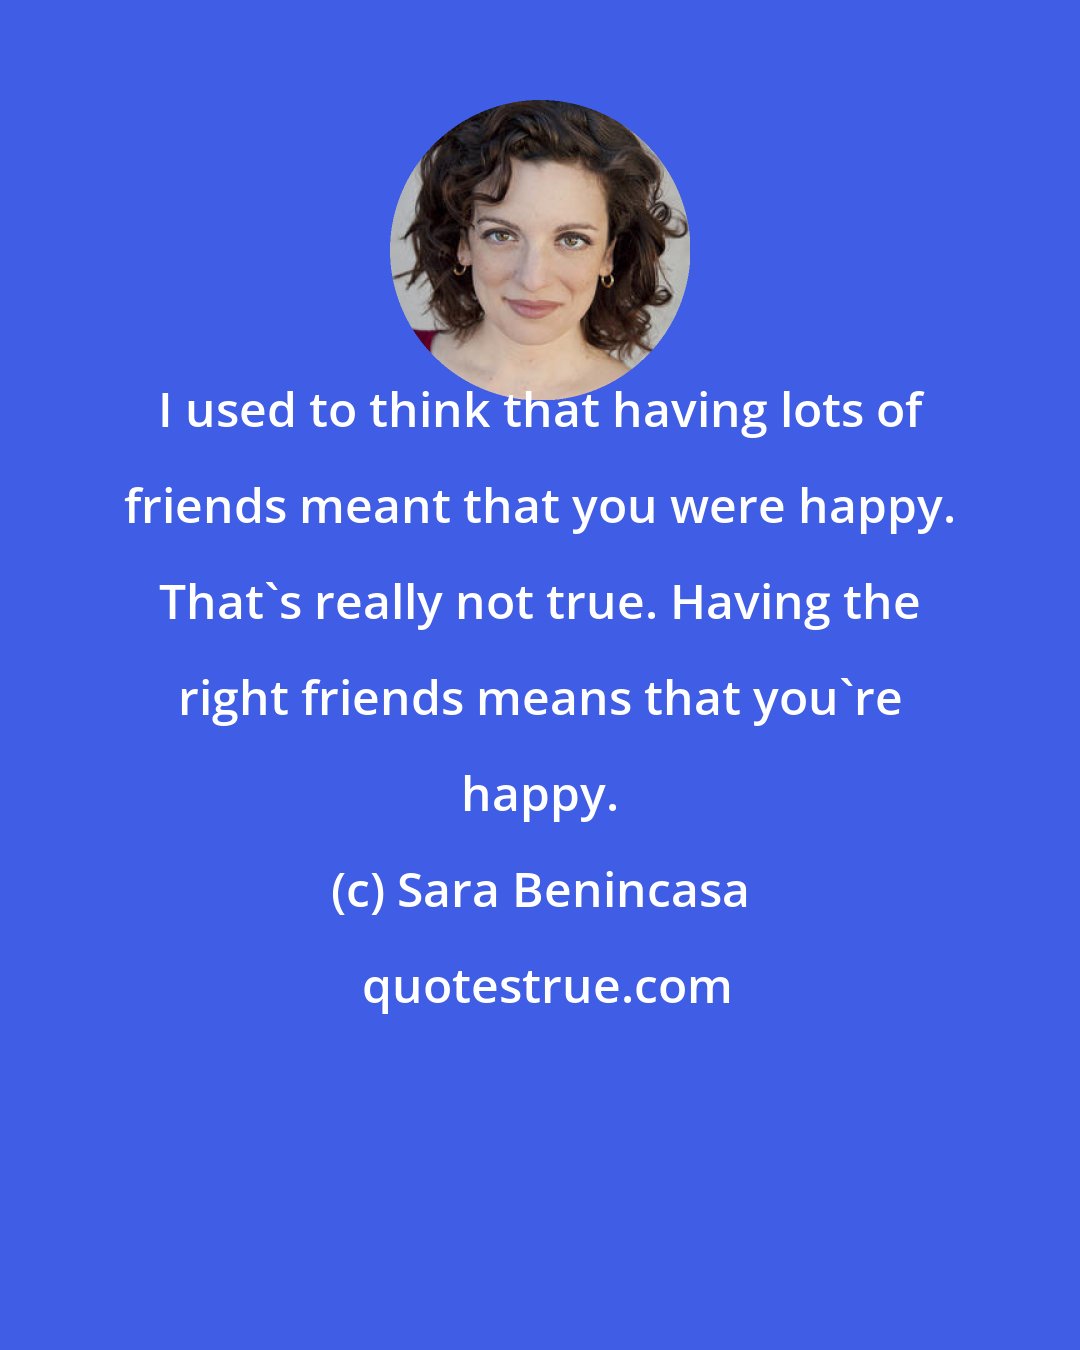 Sara Benincasa: I used to think that having lots of friends meant that you were happy. That's really not true. Having the right friends means that you're happy.